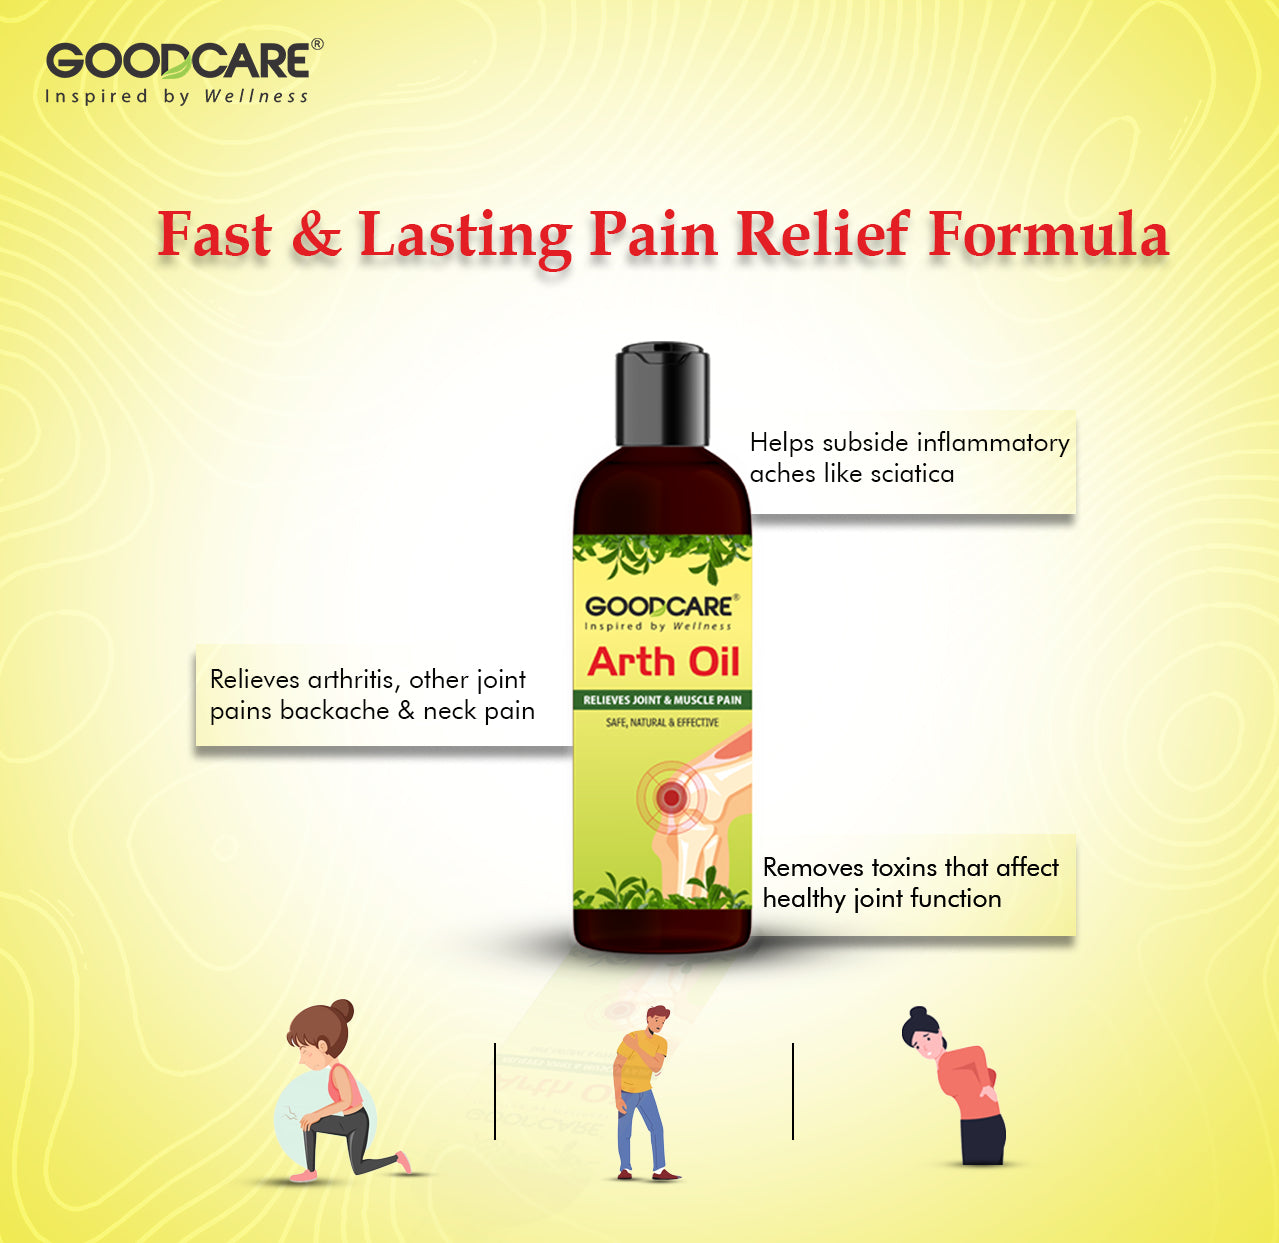 GOODCARE Arth Oil | Ayurvedic Pain Relief Oil - Effective in Arthritis, Muscle Pain, Joint Pain and Back Pain, with Ama Haldi, Ashwagandha - 100 ml